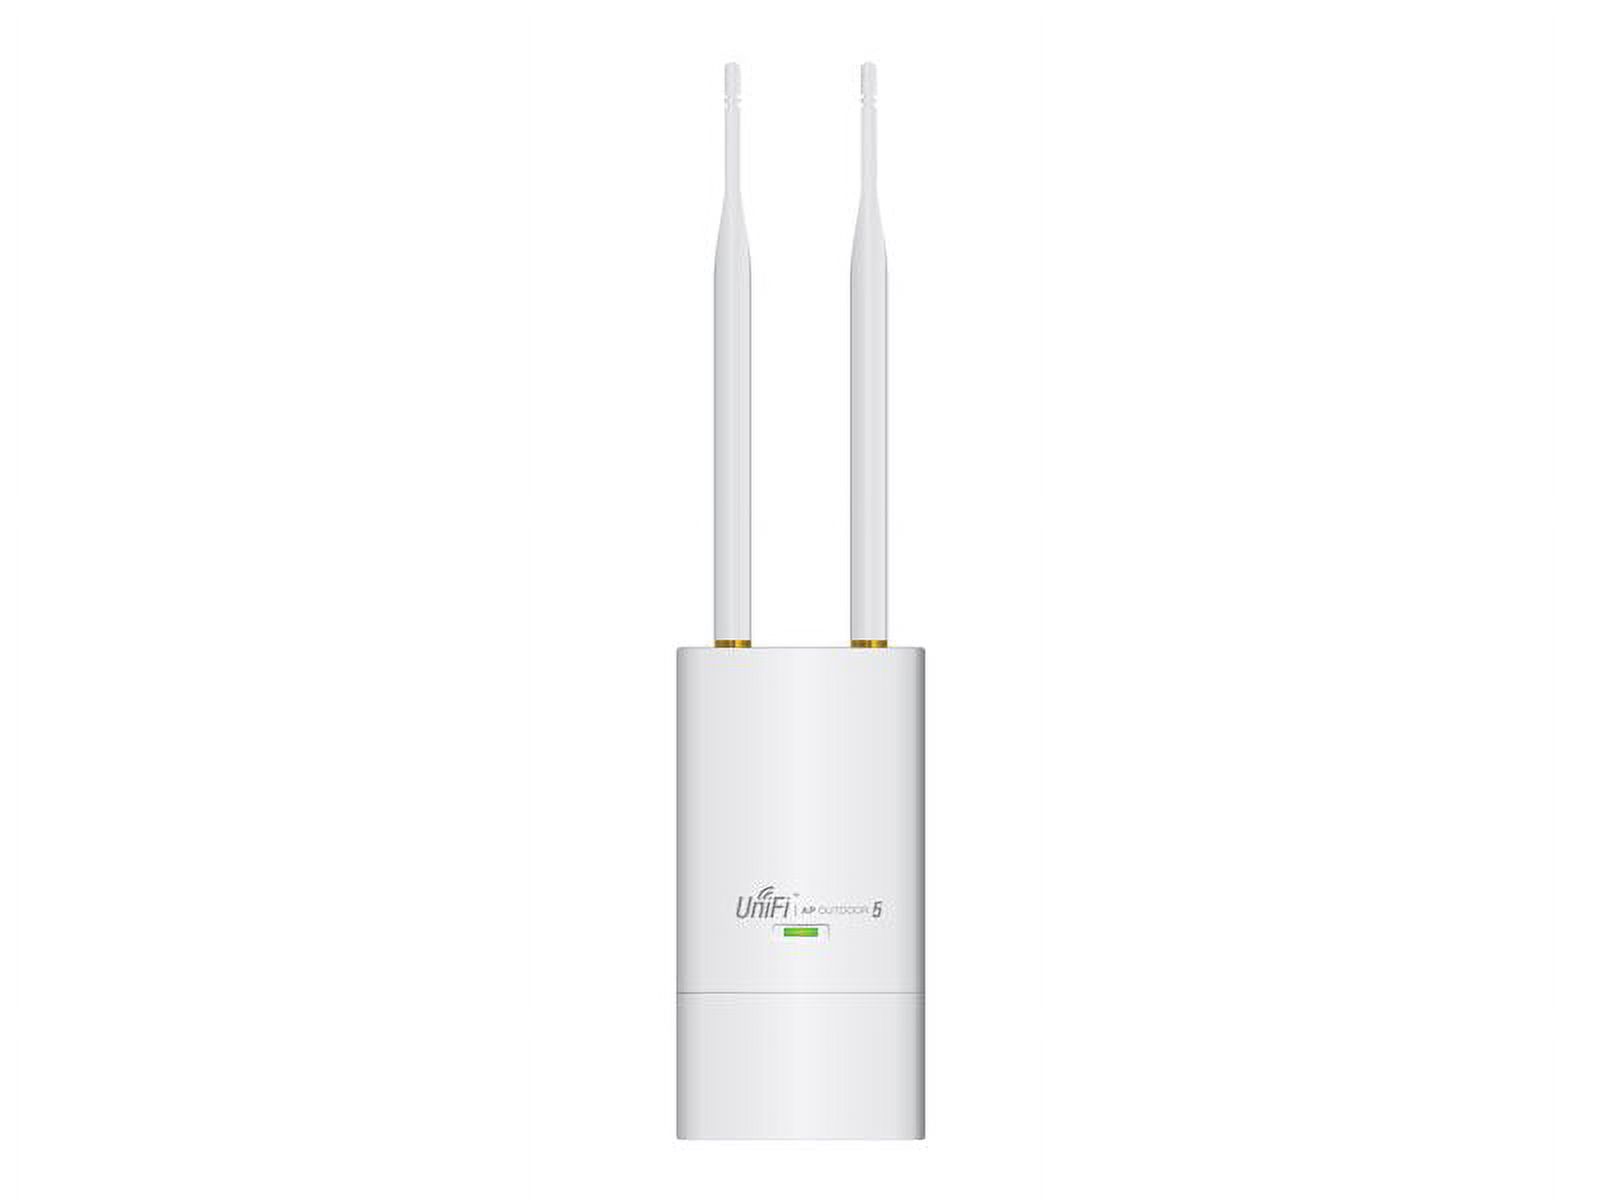 Ubiquiti UniFi UAP-Outdoor5 IEEE 802.11n 300 Mbit/s Wireless Access Point - image 5 of 16